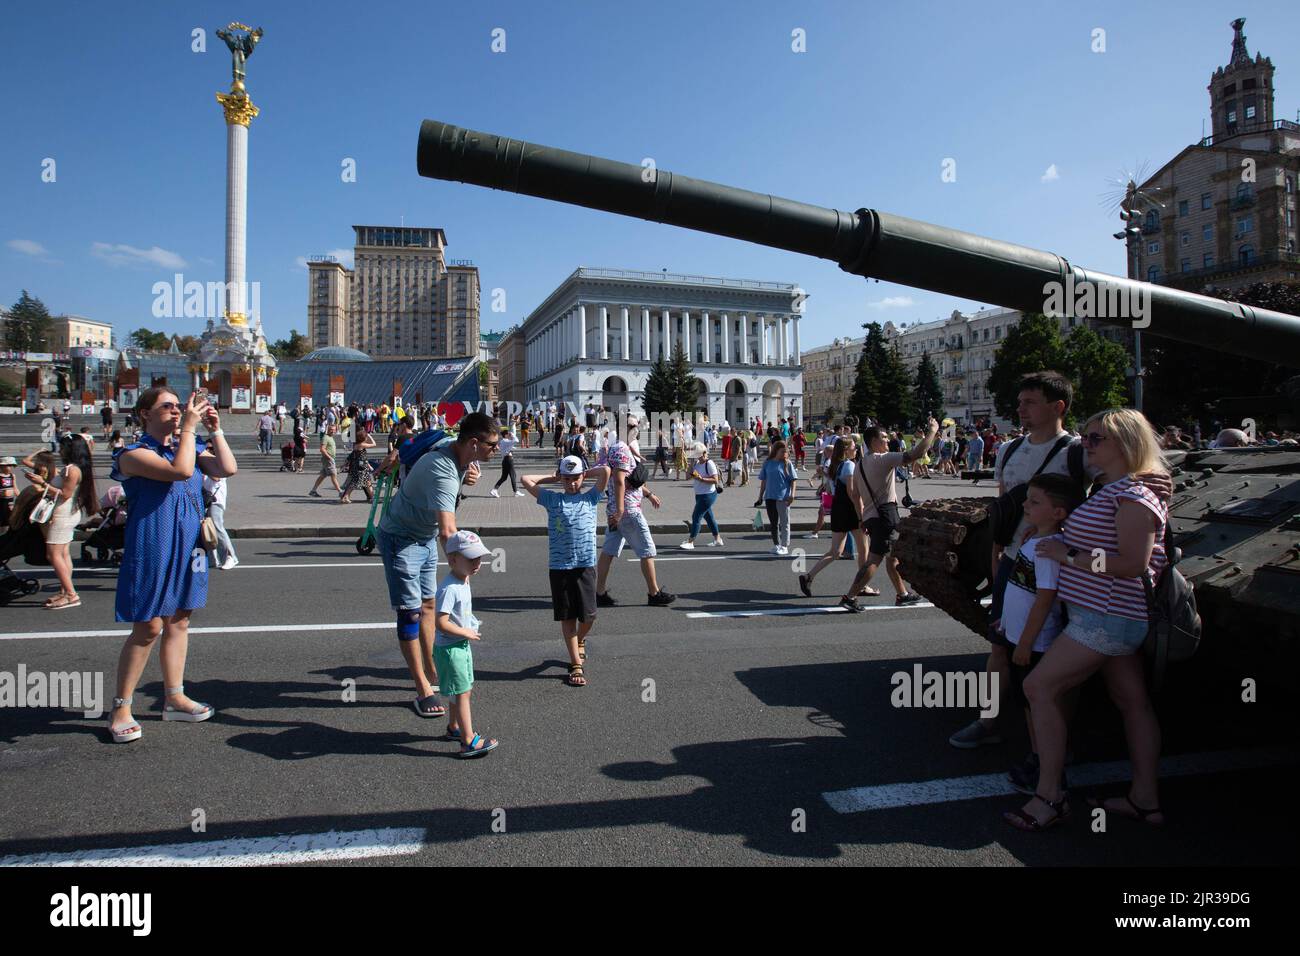 People take photos in front of a destroyed Russian tank displayed on the main street Khreshchatyk as part of the upcoming celebration of the Independence Day of Ukraine amid Russia's invasion of Ukraine in central Kyiv. Stock Photo